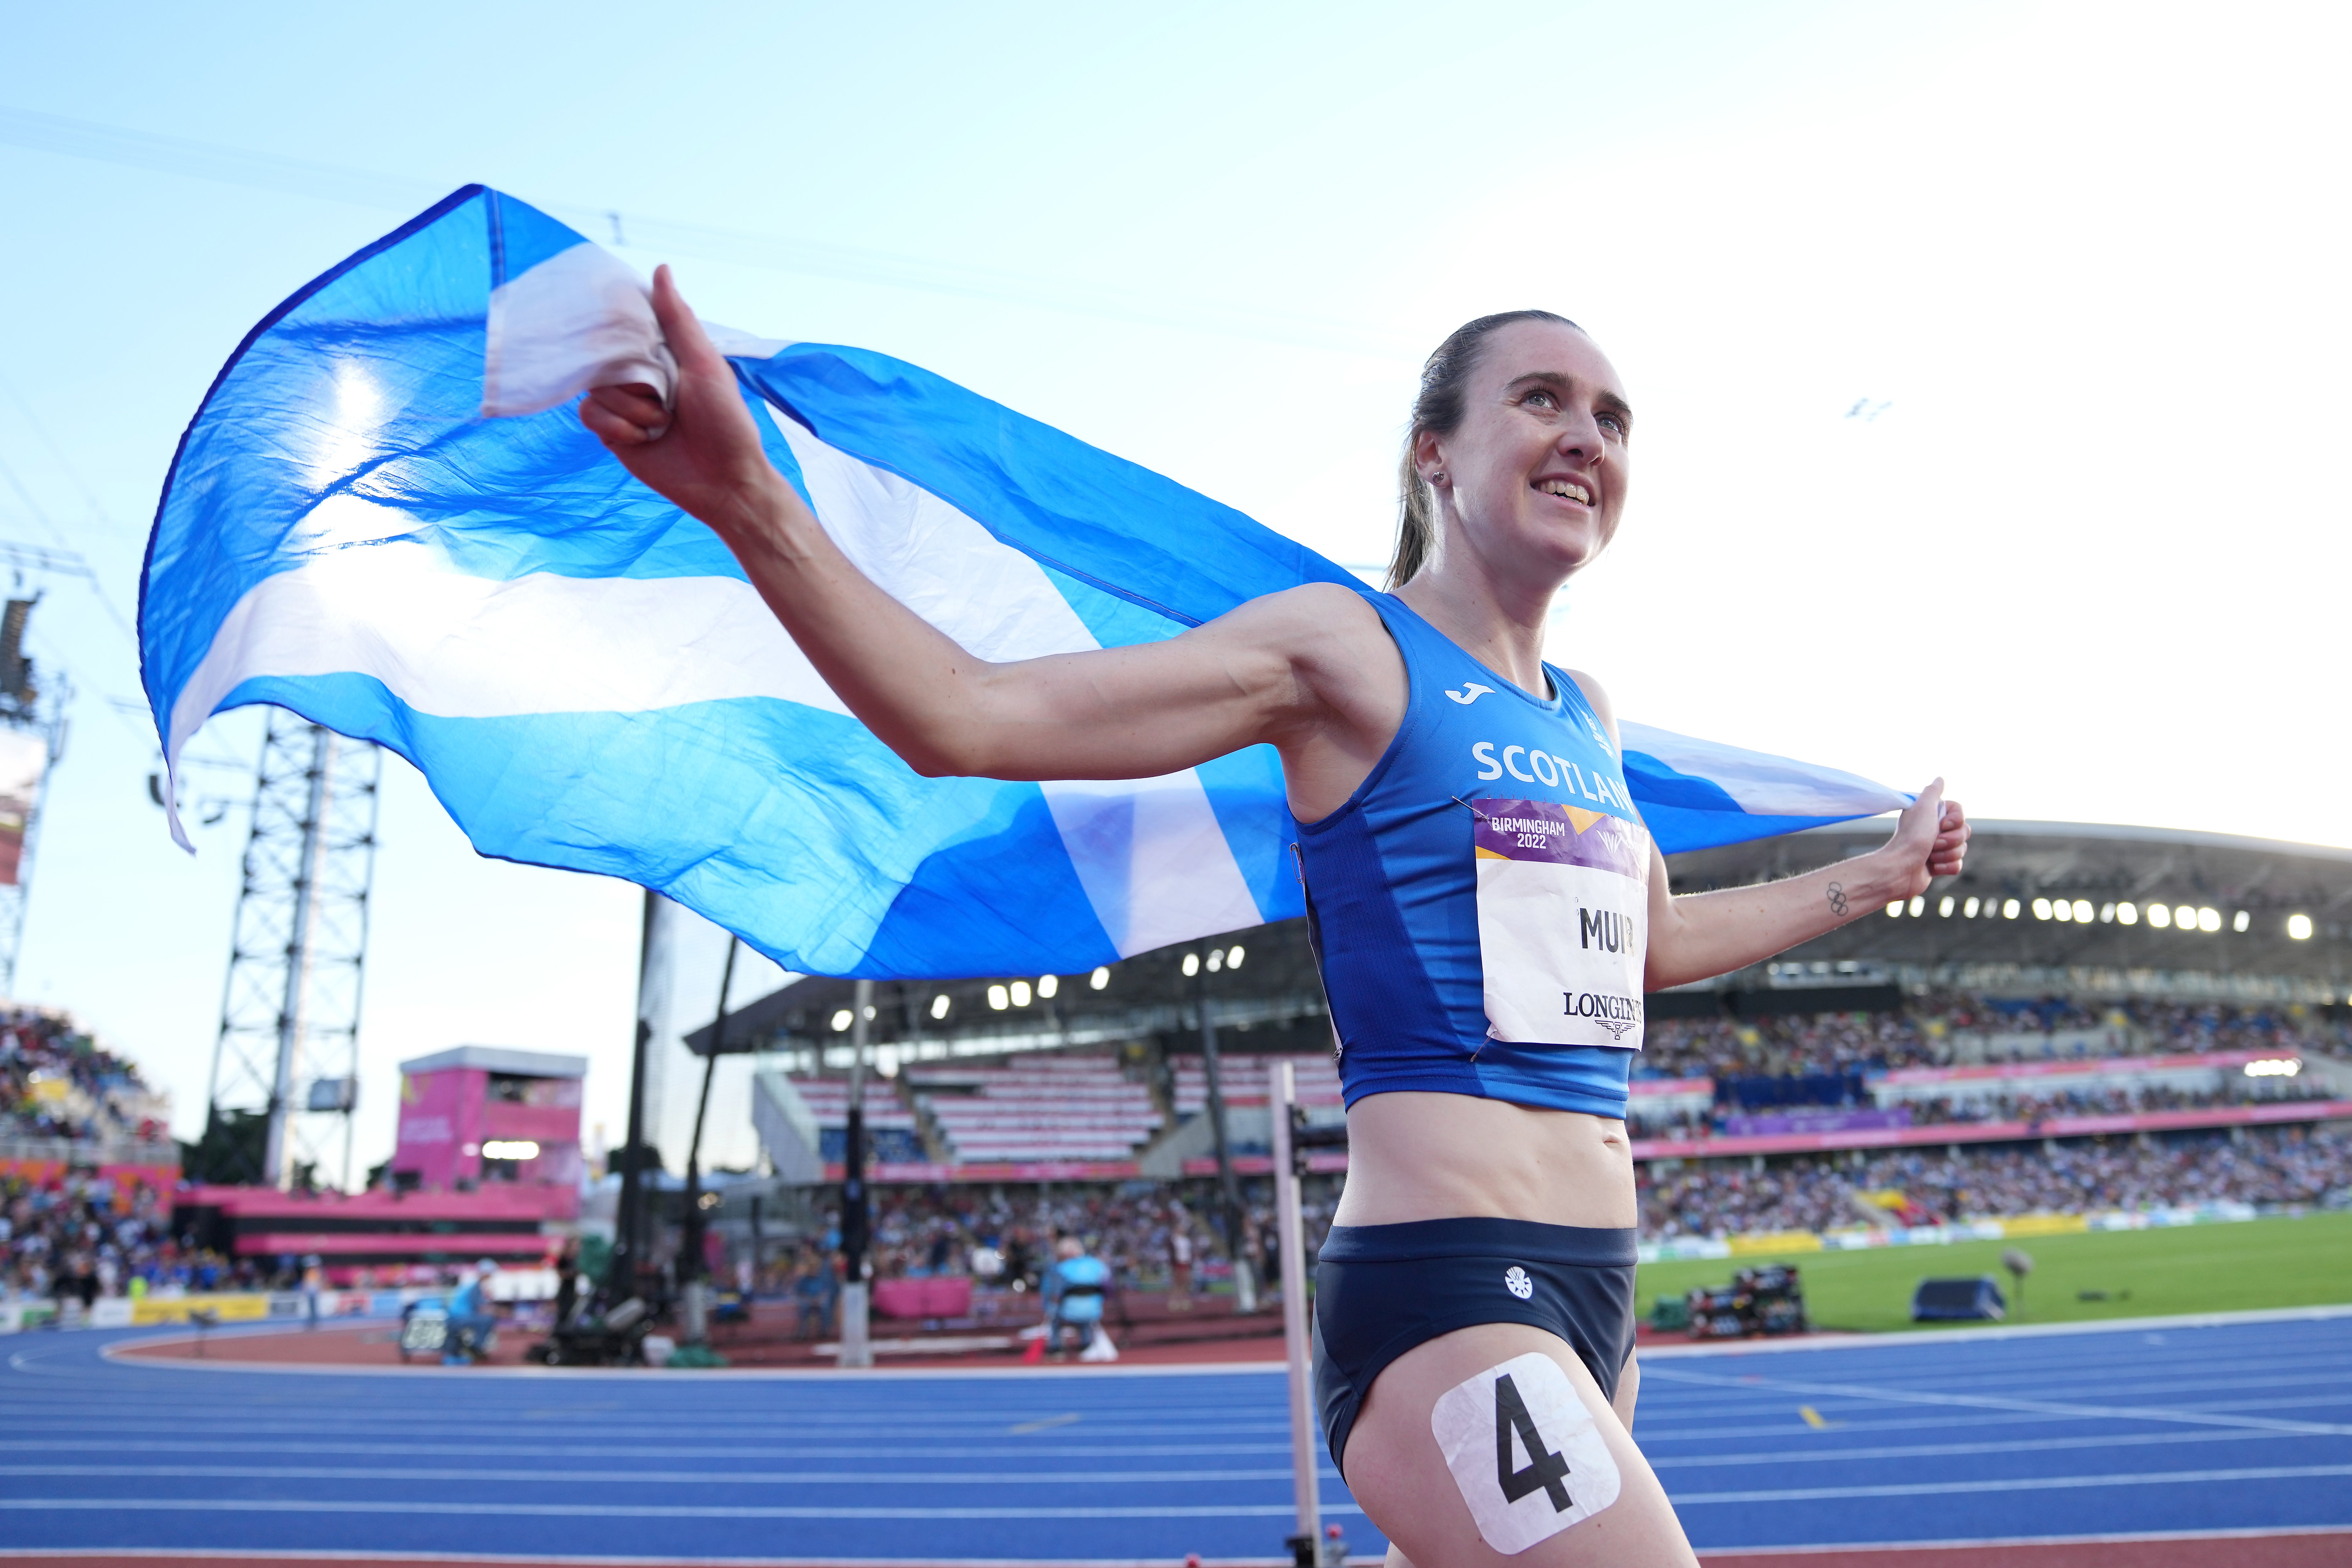 Laura Muir will be the favourite in the women’s 1,500m